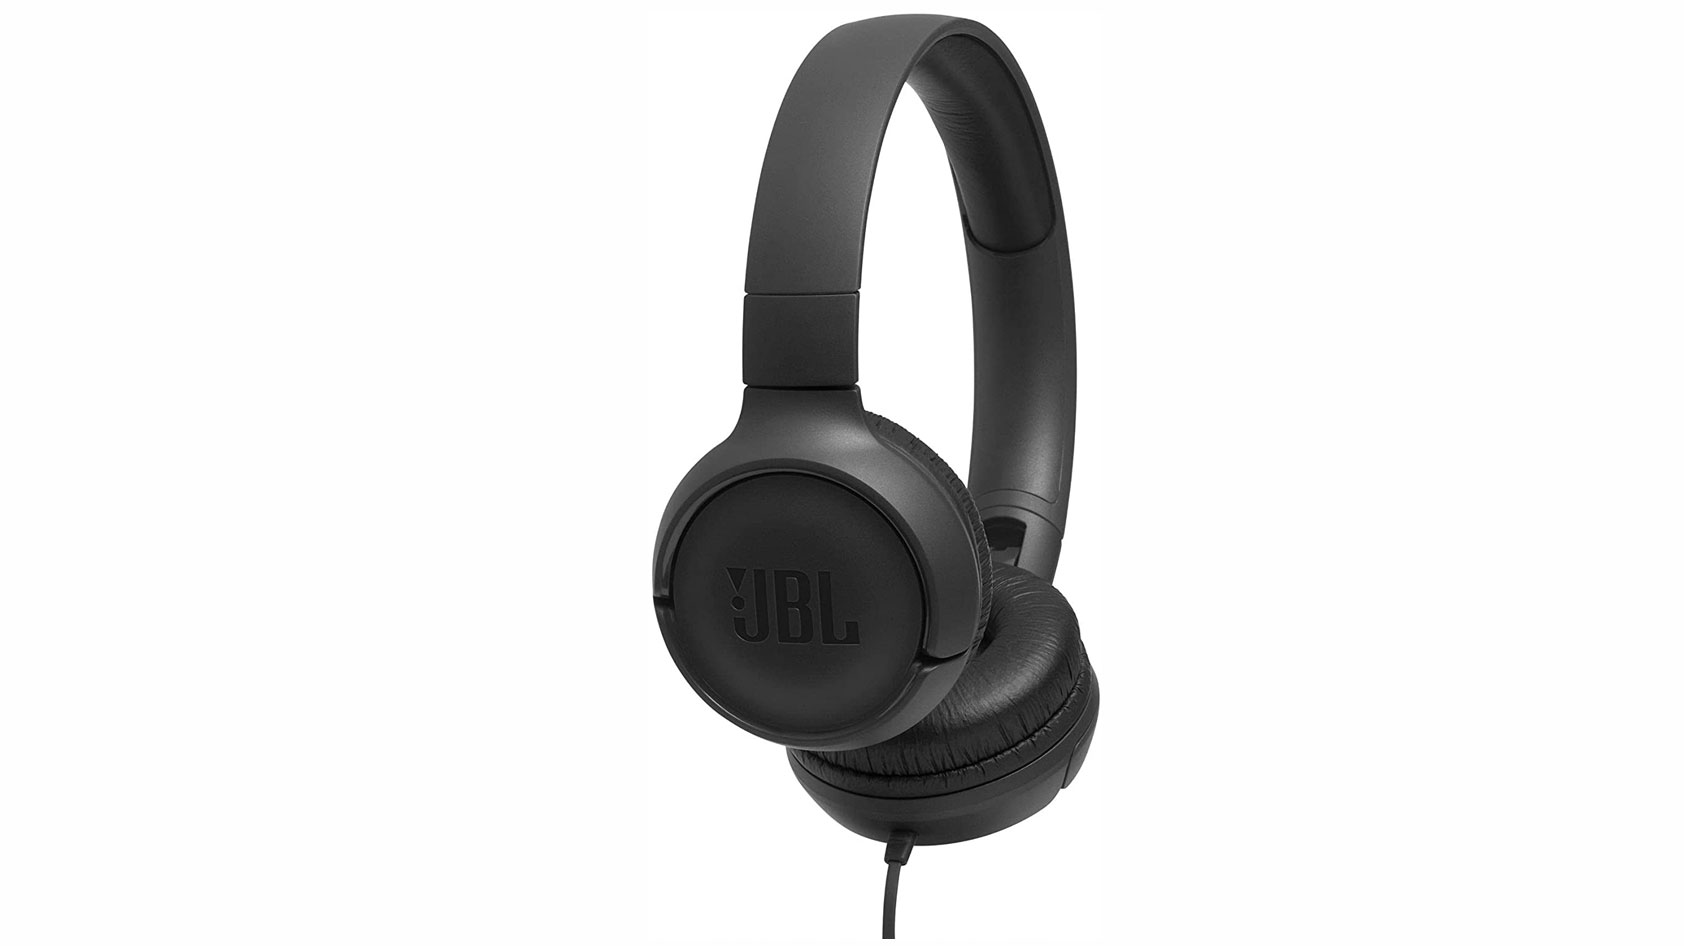 The JBL Tune 500 wired headphones in black against a white background.